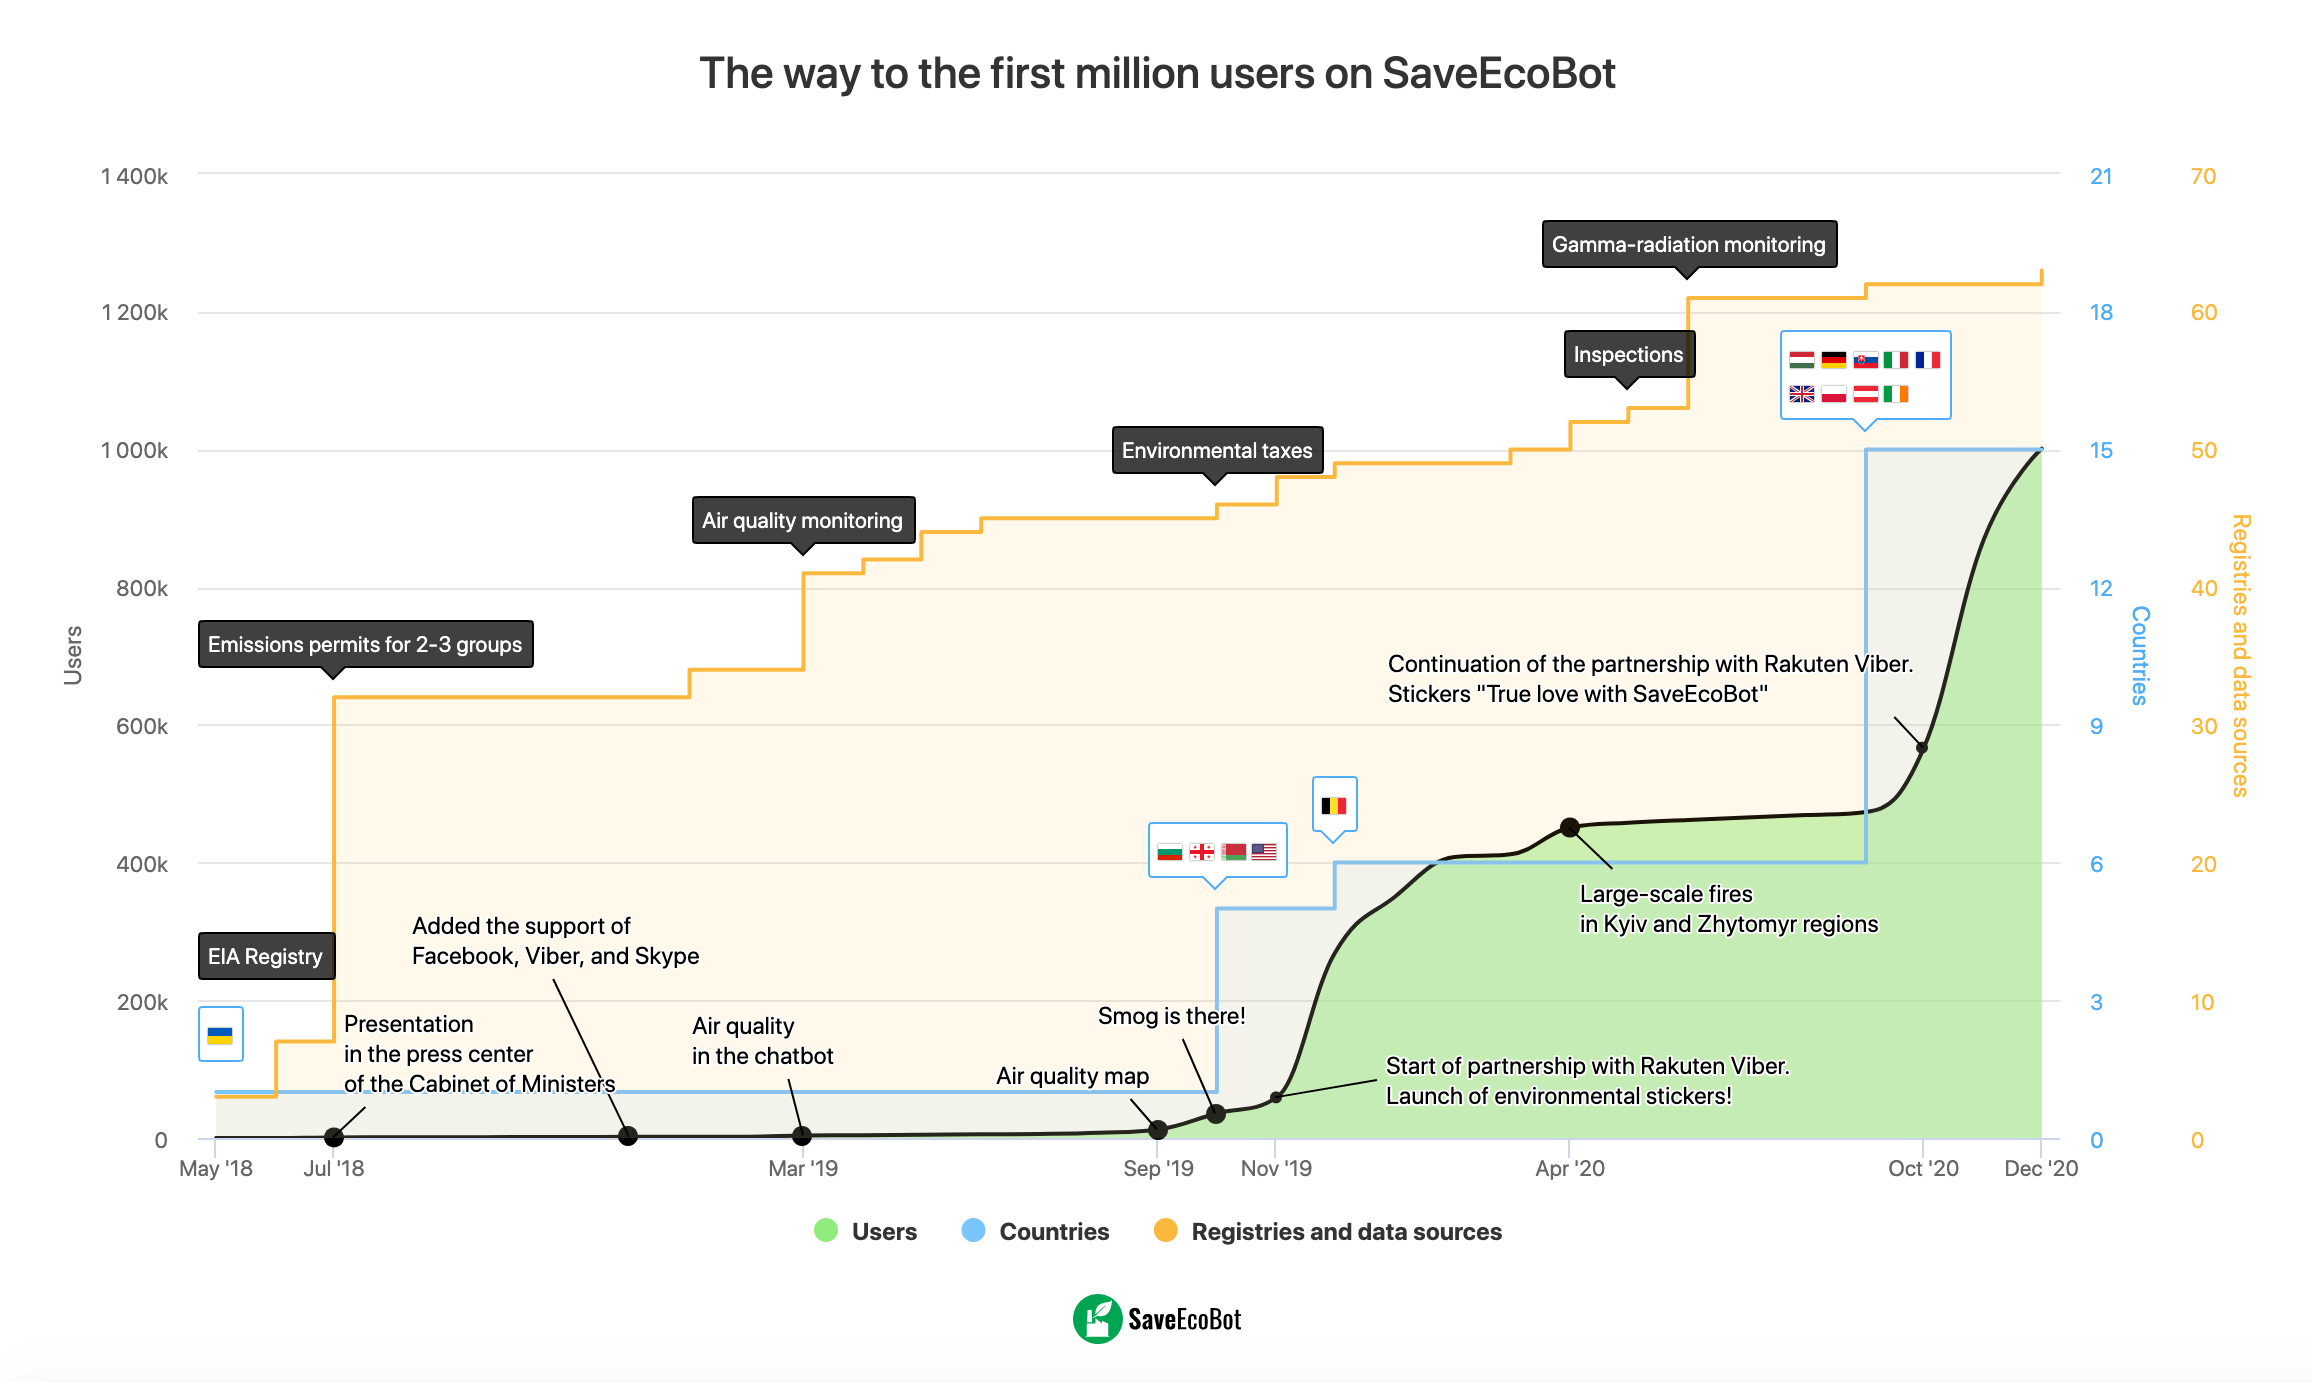 The way to the first million users on SaveEcoBot